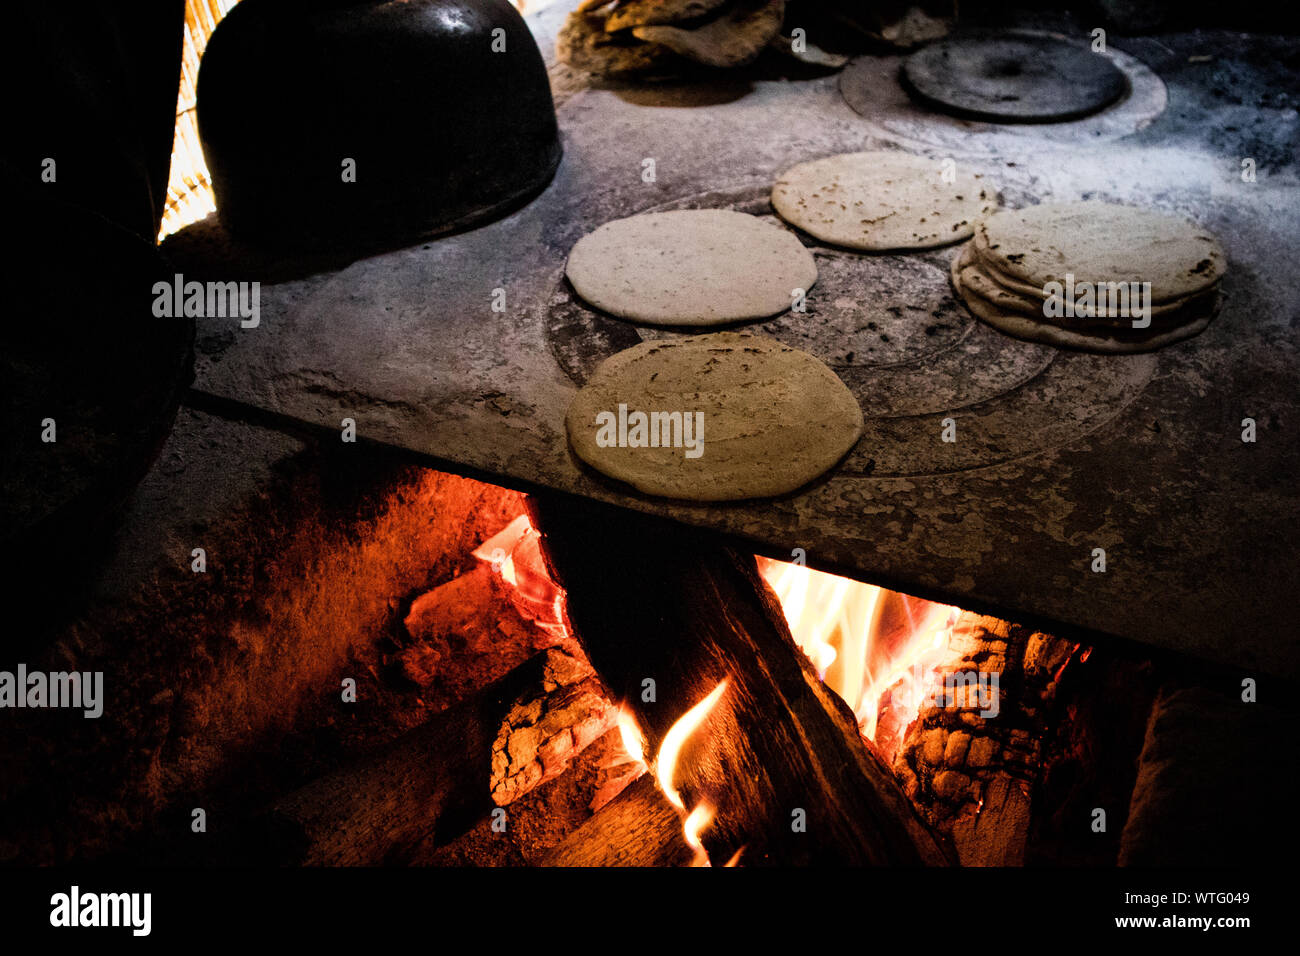 Nutritious Handmade Corn Tortilla Cooked On A Metal Griddle On A Gas Stove  In A Guatemalan Home Stock Photo - Download Image Now - iStock